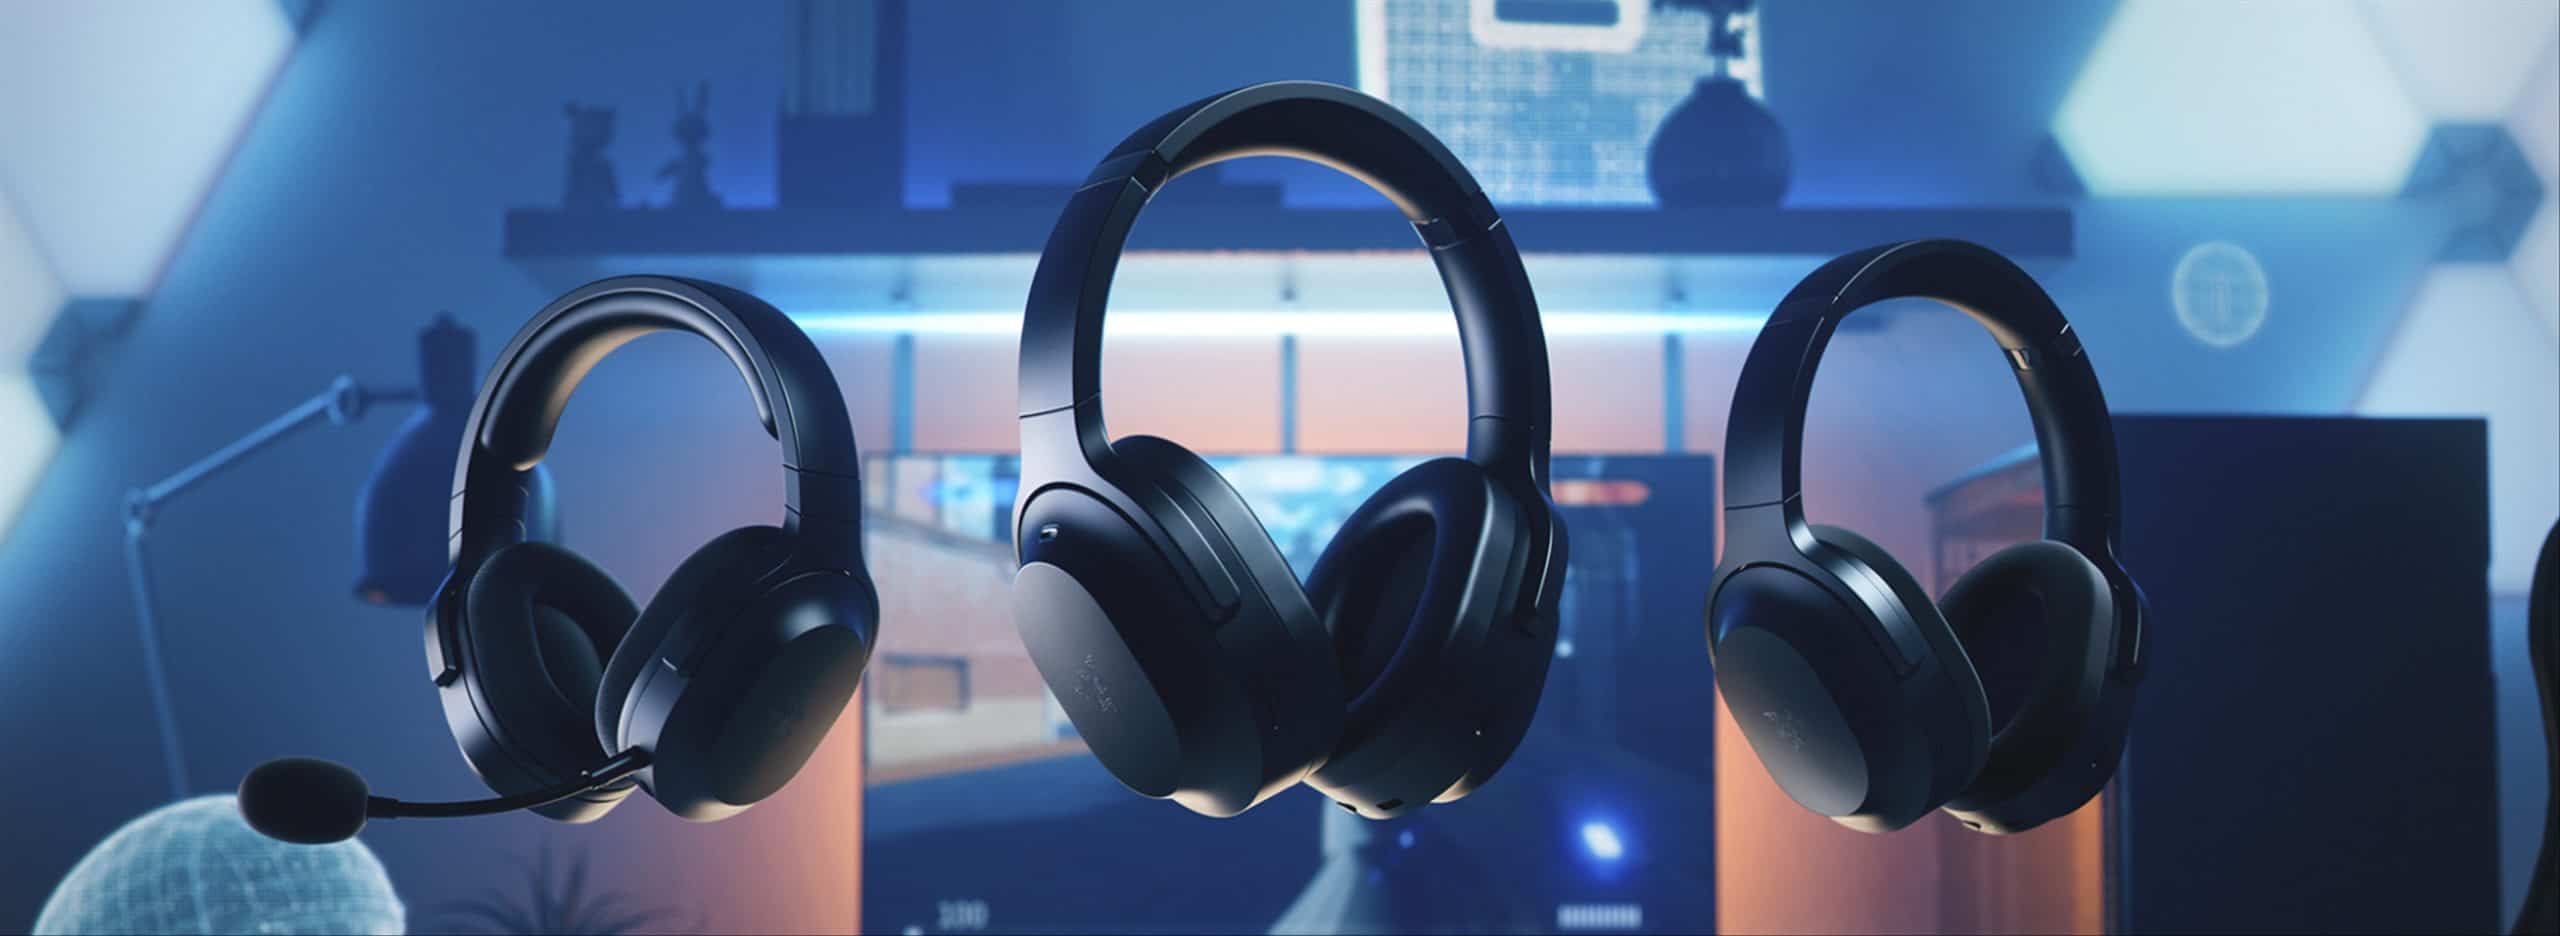 Razer announced new gaming headsets with integrated noise cancelling headphones